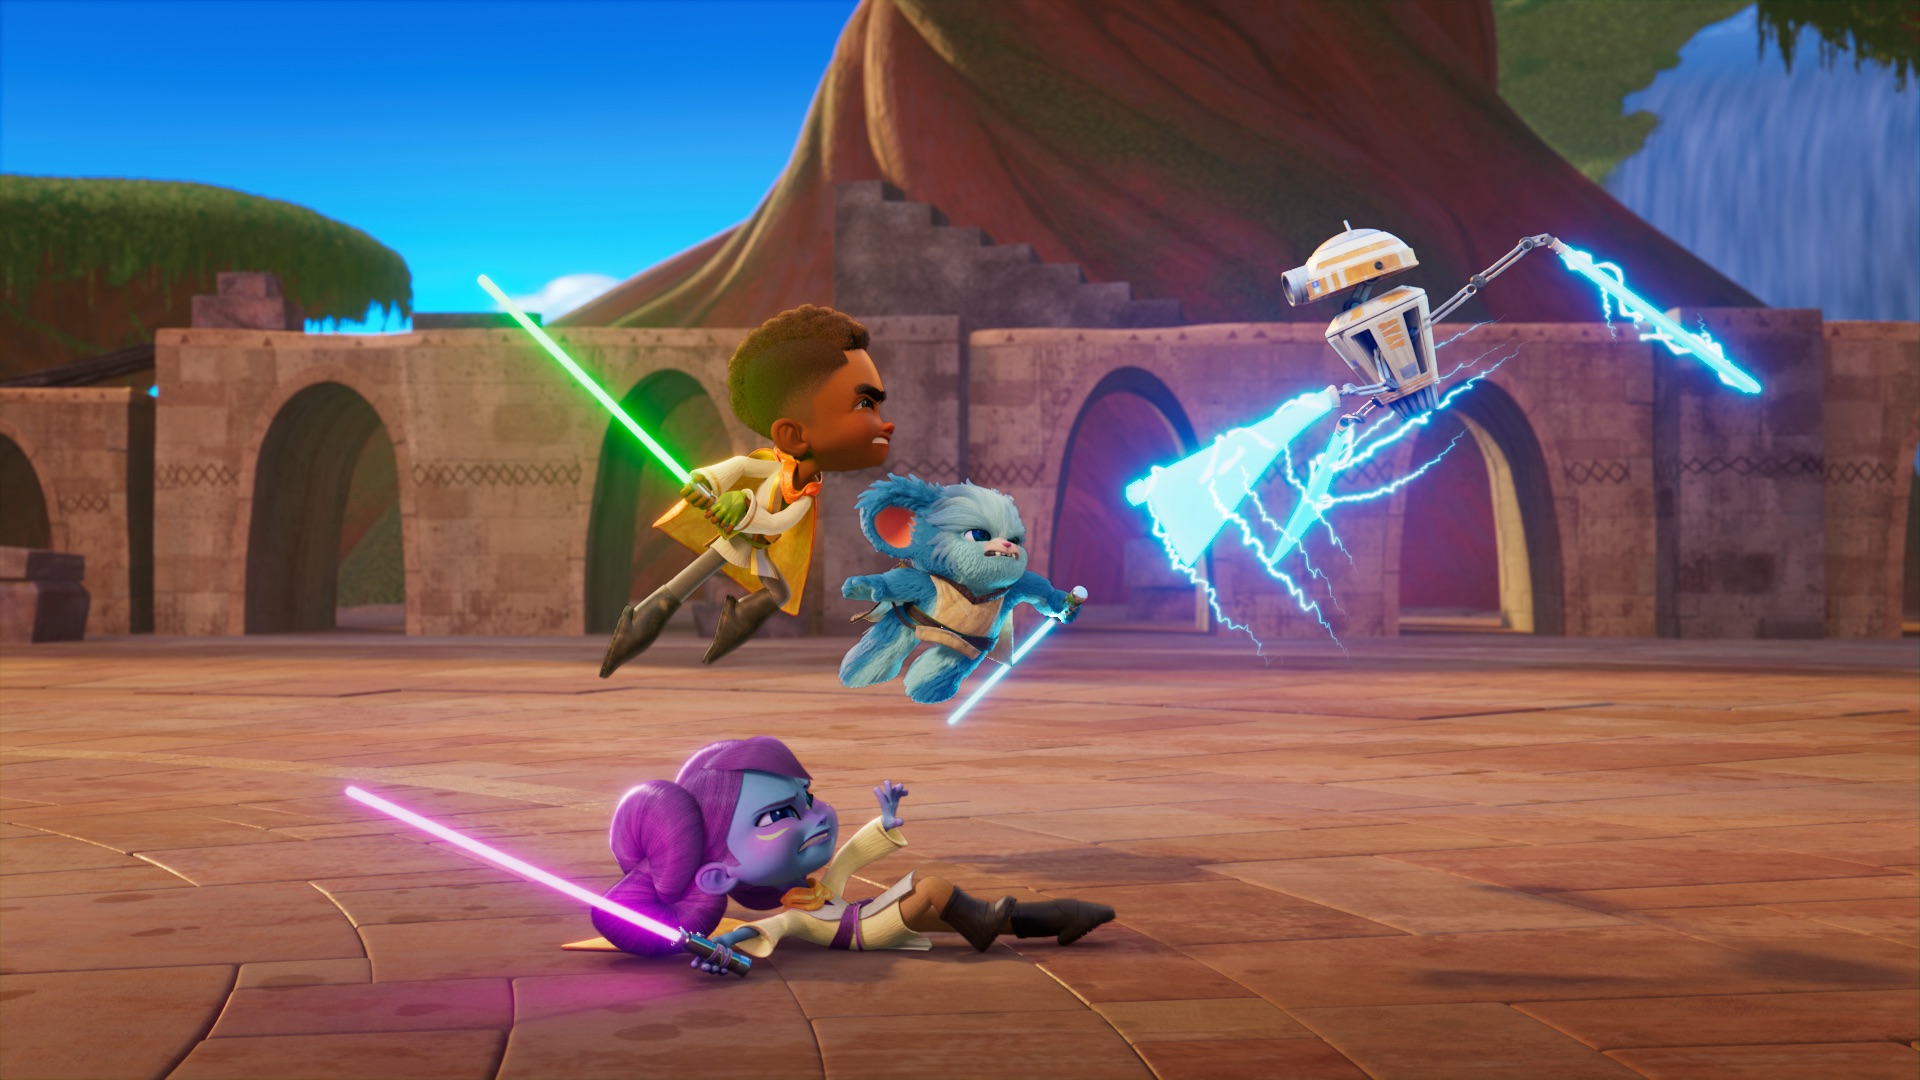 Everything we know about Star Wars: Young Jedi Adventures